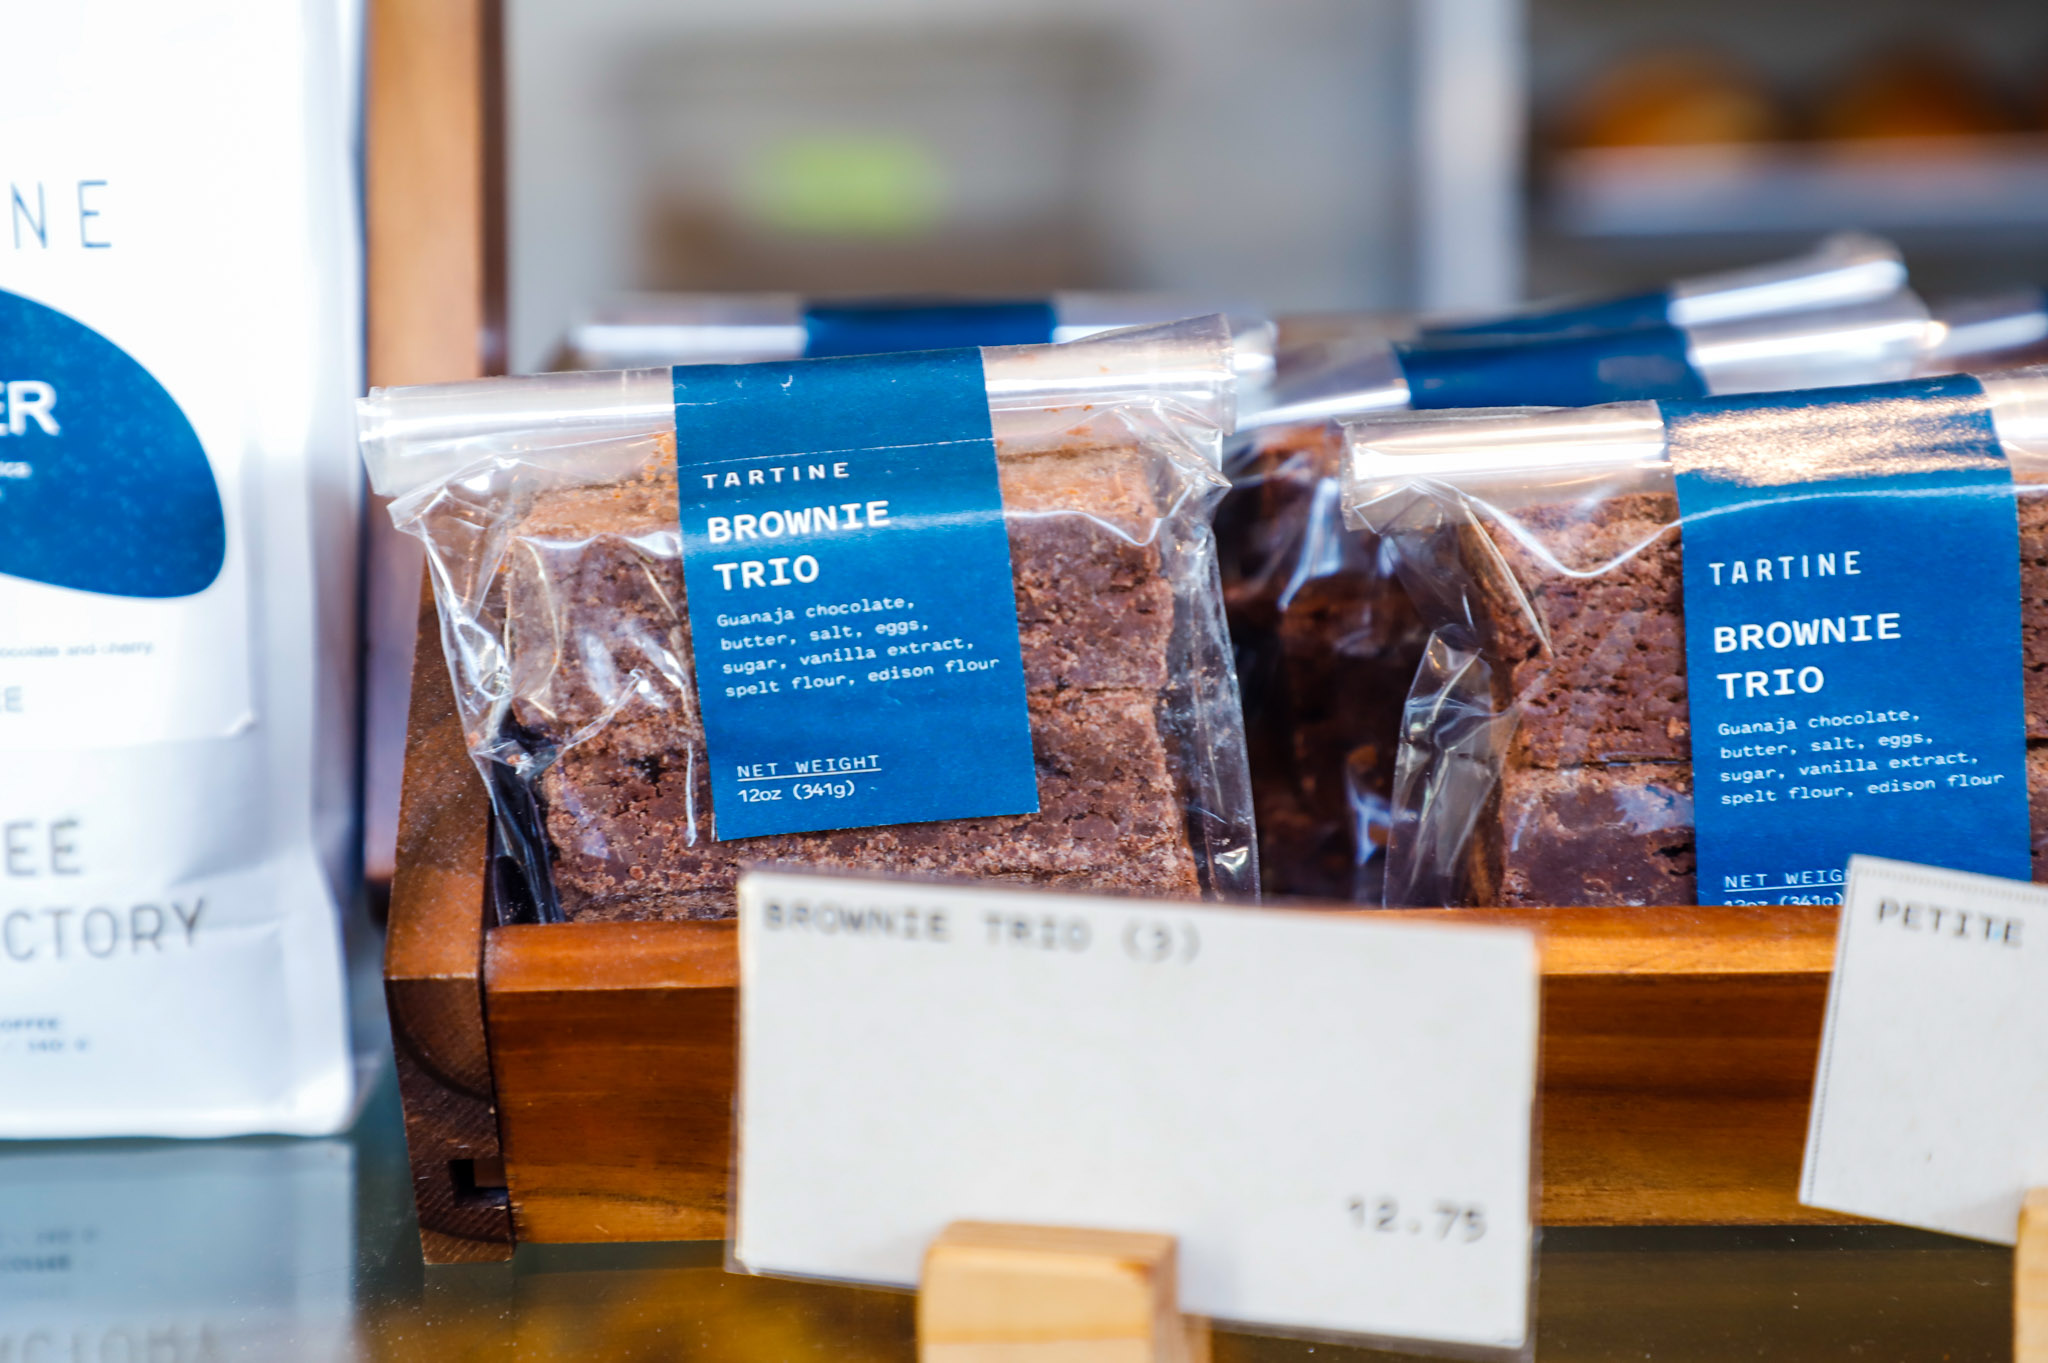 Two packages of brownies sit side by side on display at a bakery with the label &quot;tartine brownie trio&quot; on them in blue.